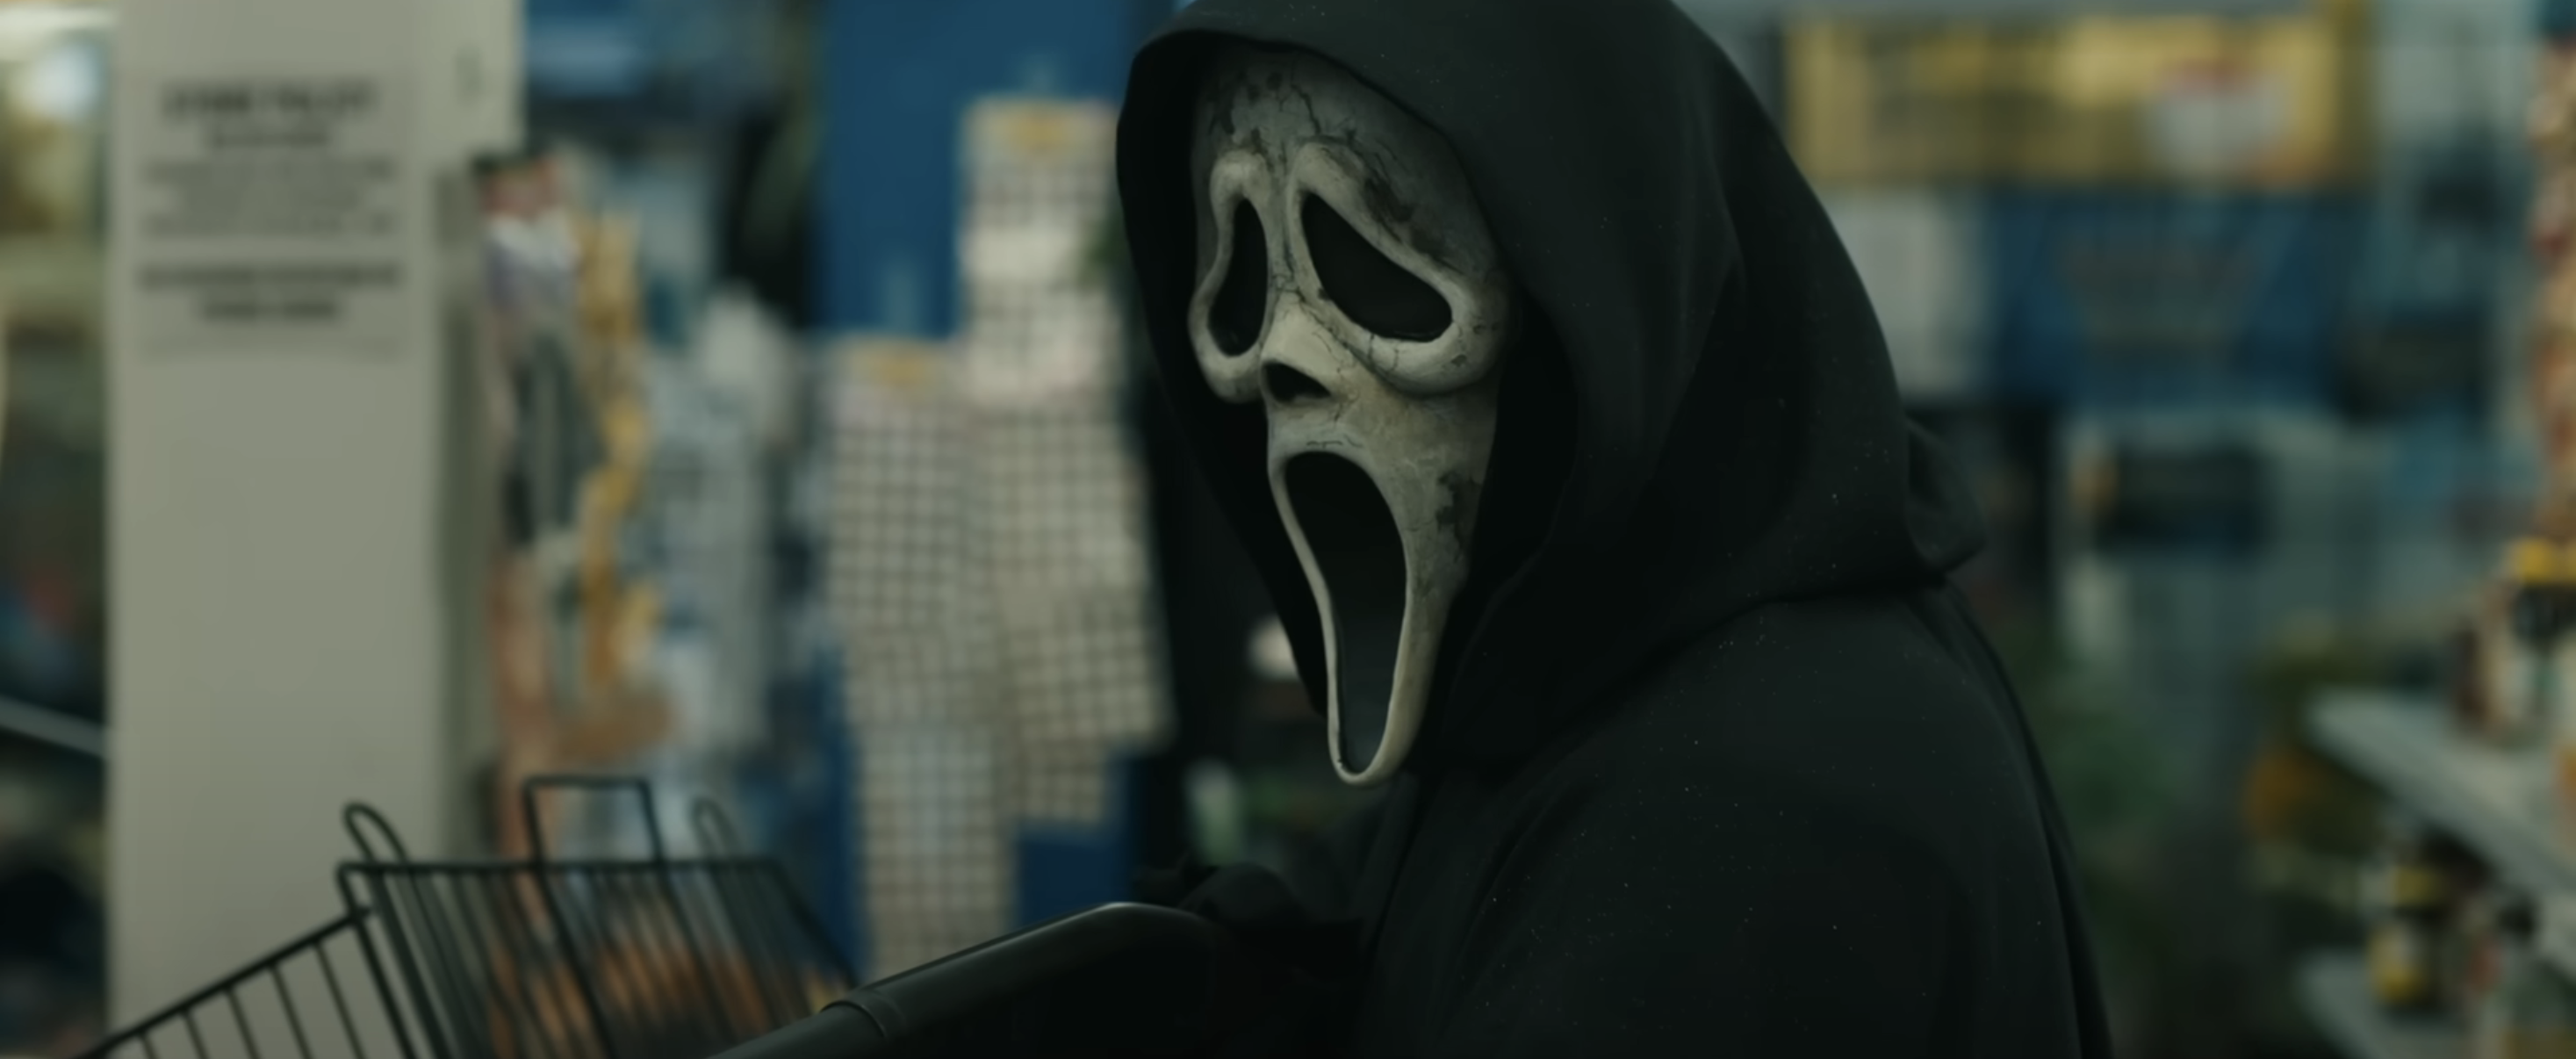 Ghostface standing in a store aisle from the Scream franchise